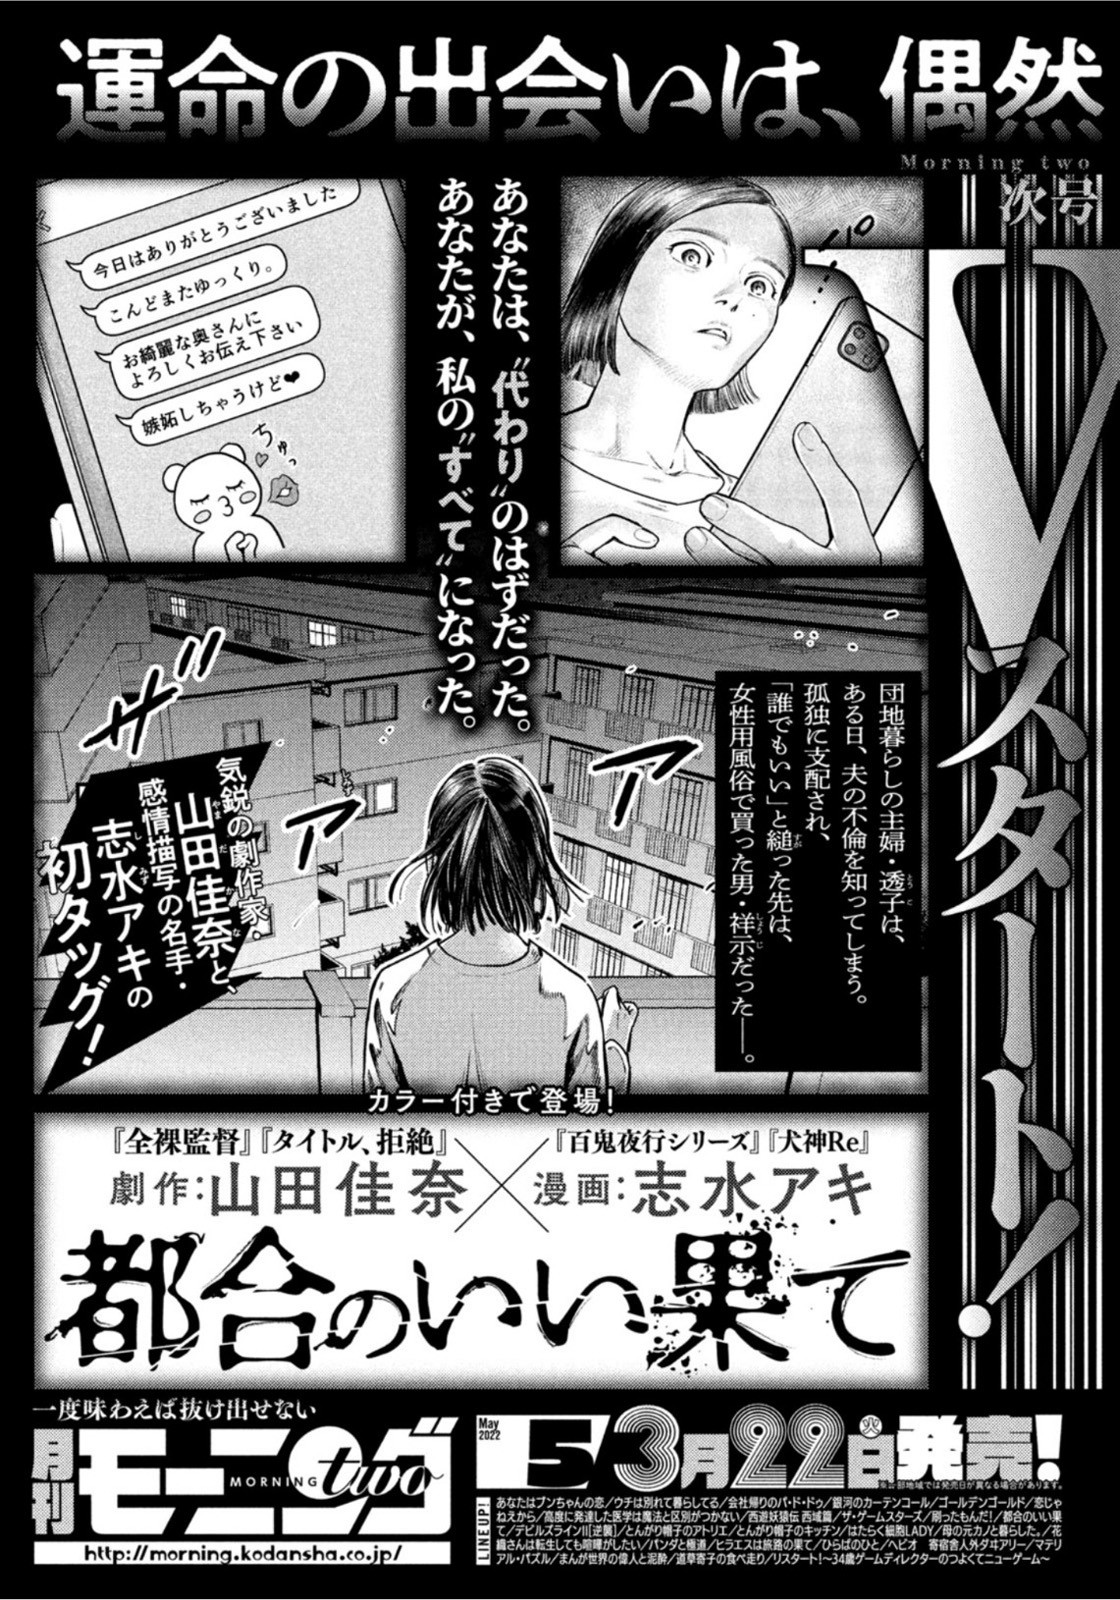 Weekly Morning - 週刊モーニング - Chapter 2022-16 - Page 419